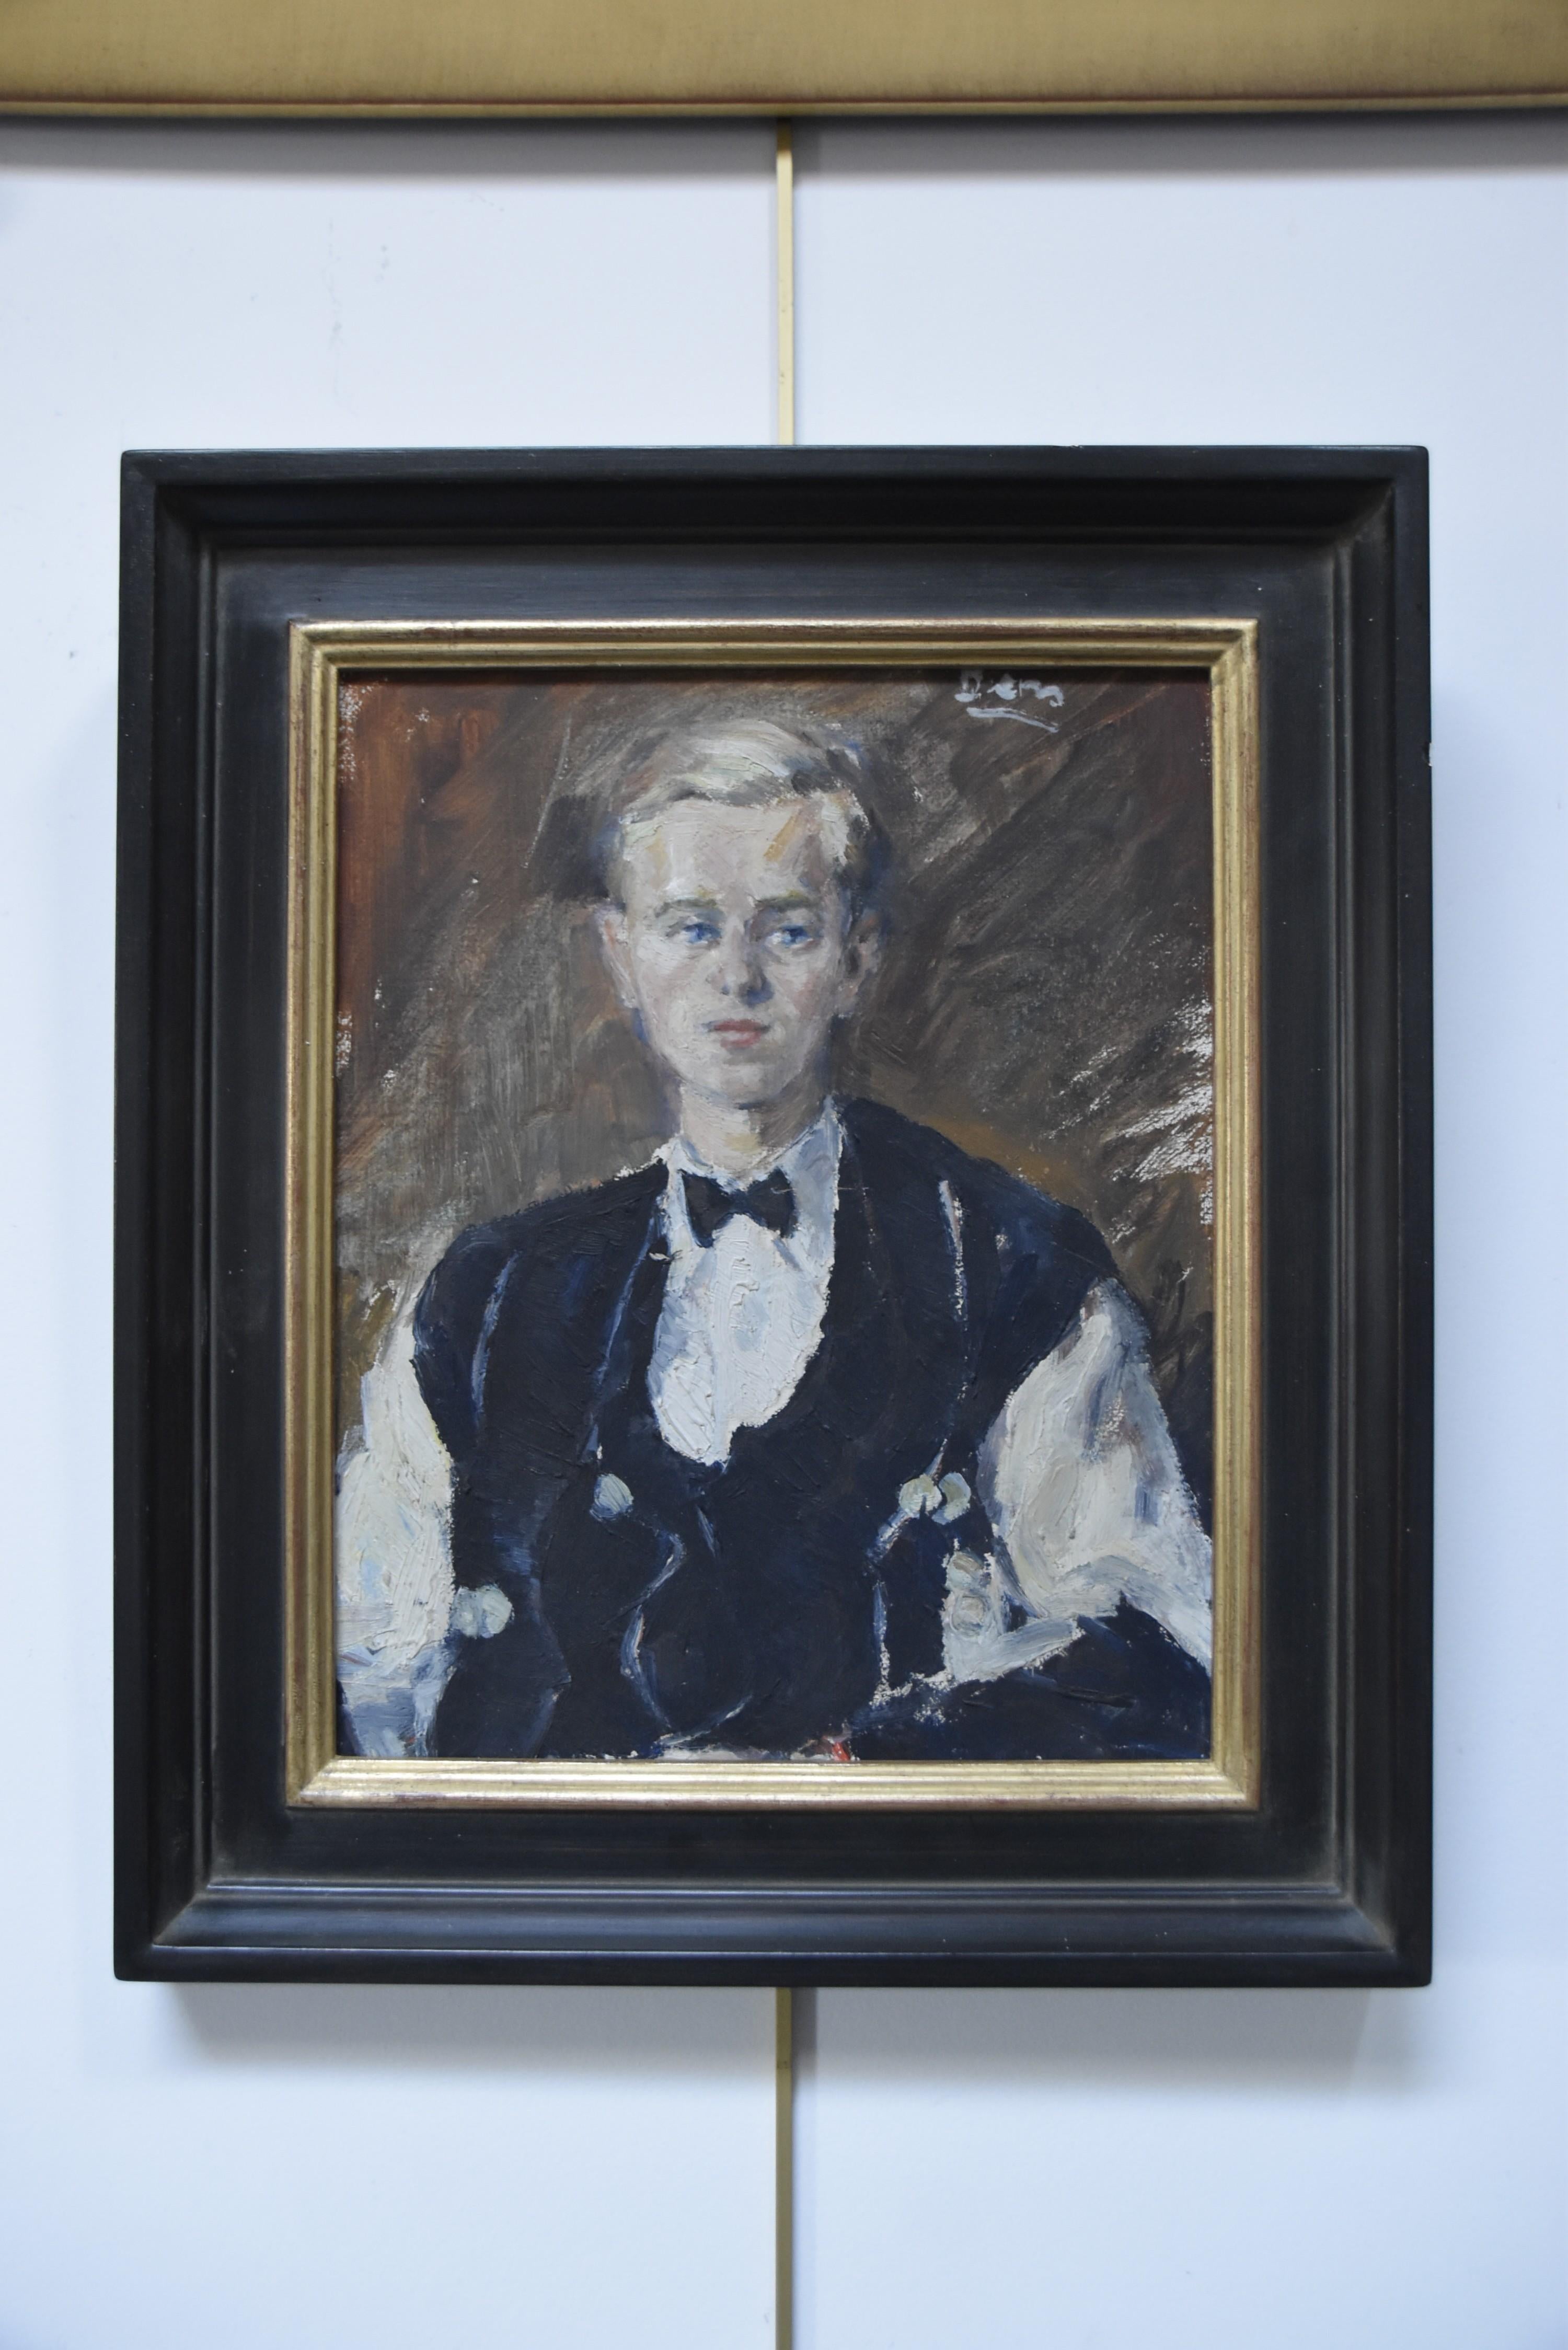 French school circa 1930
Portrait of a young man with blue eyes
Oil on cardboard panel
27 x 21.5 cm
Bears a signature (illegible) upper right
Framed : 34.5 x 29.5 cm
 